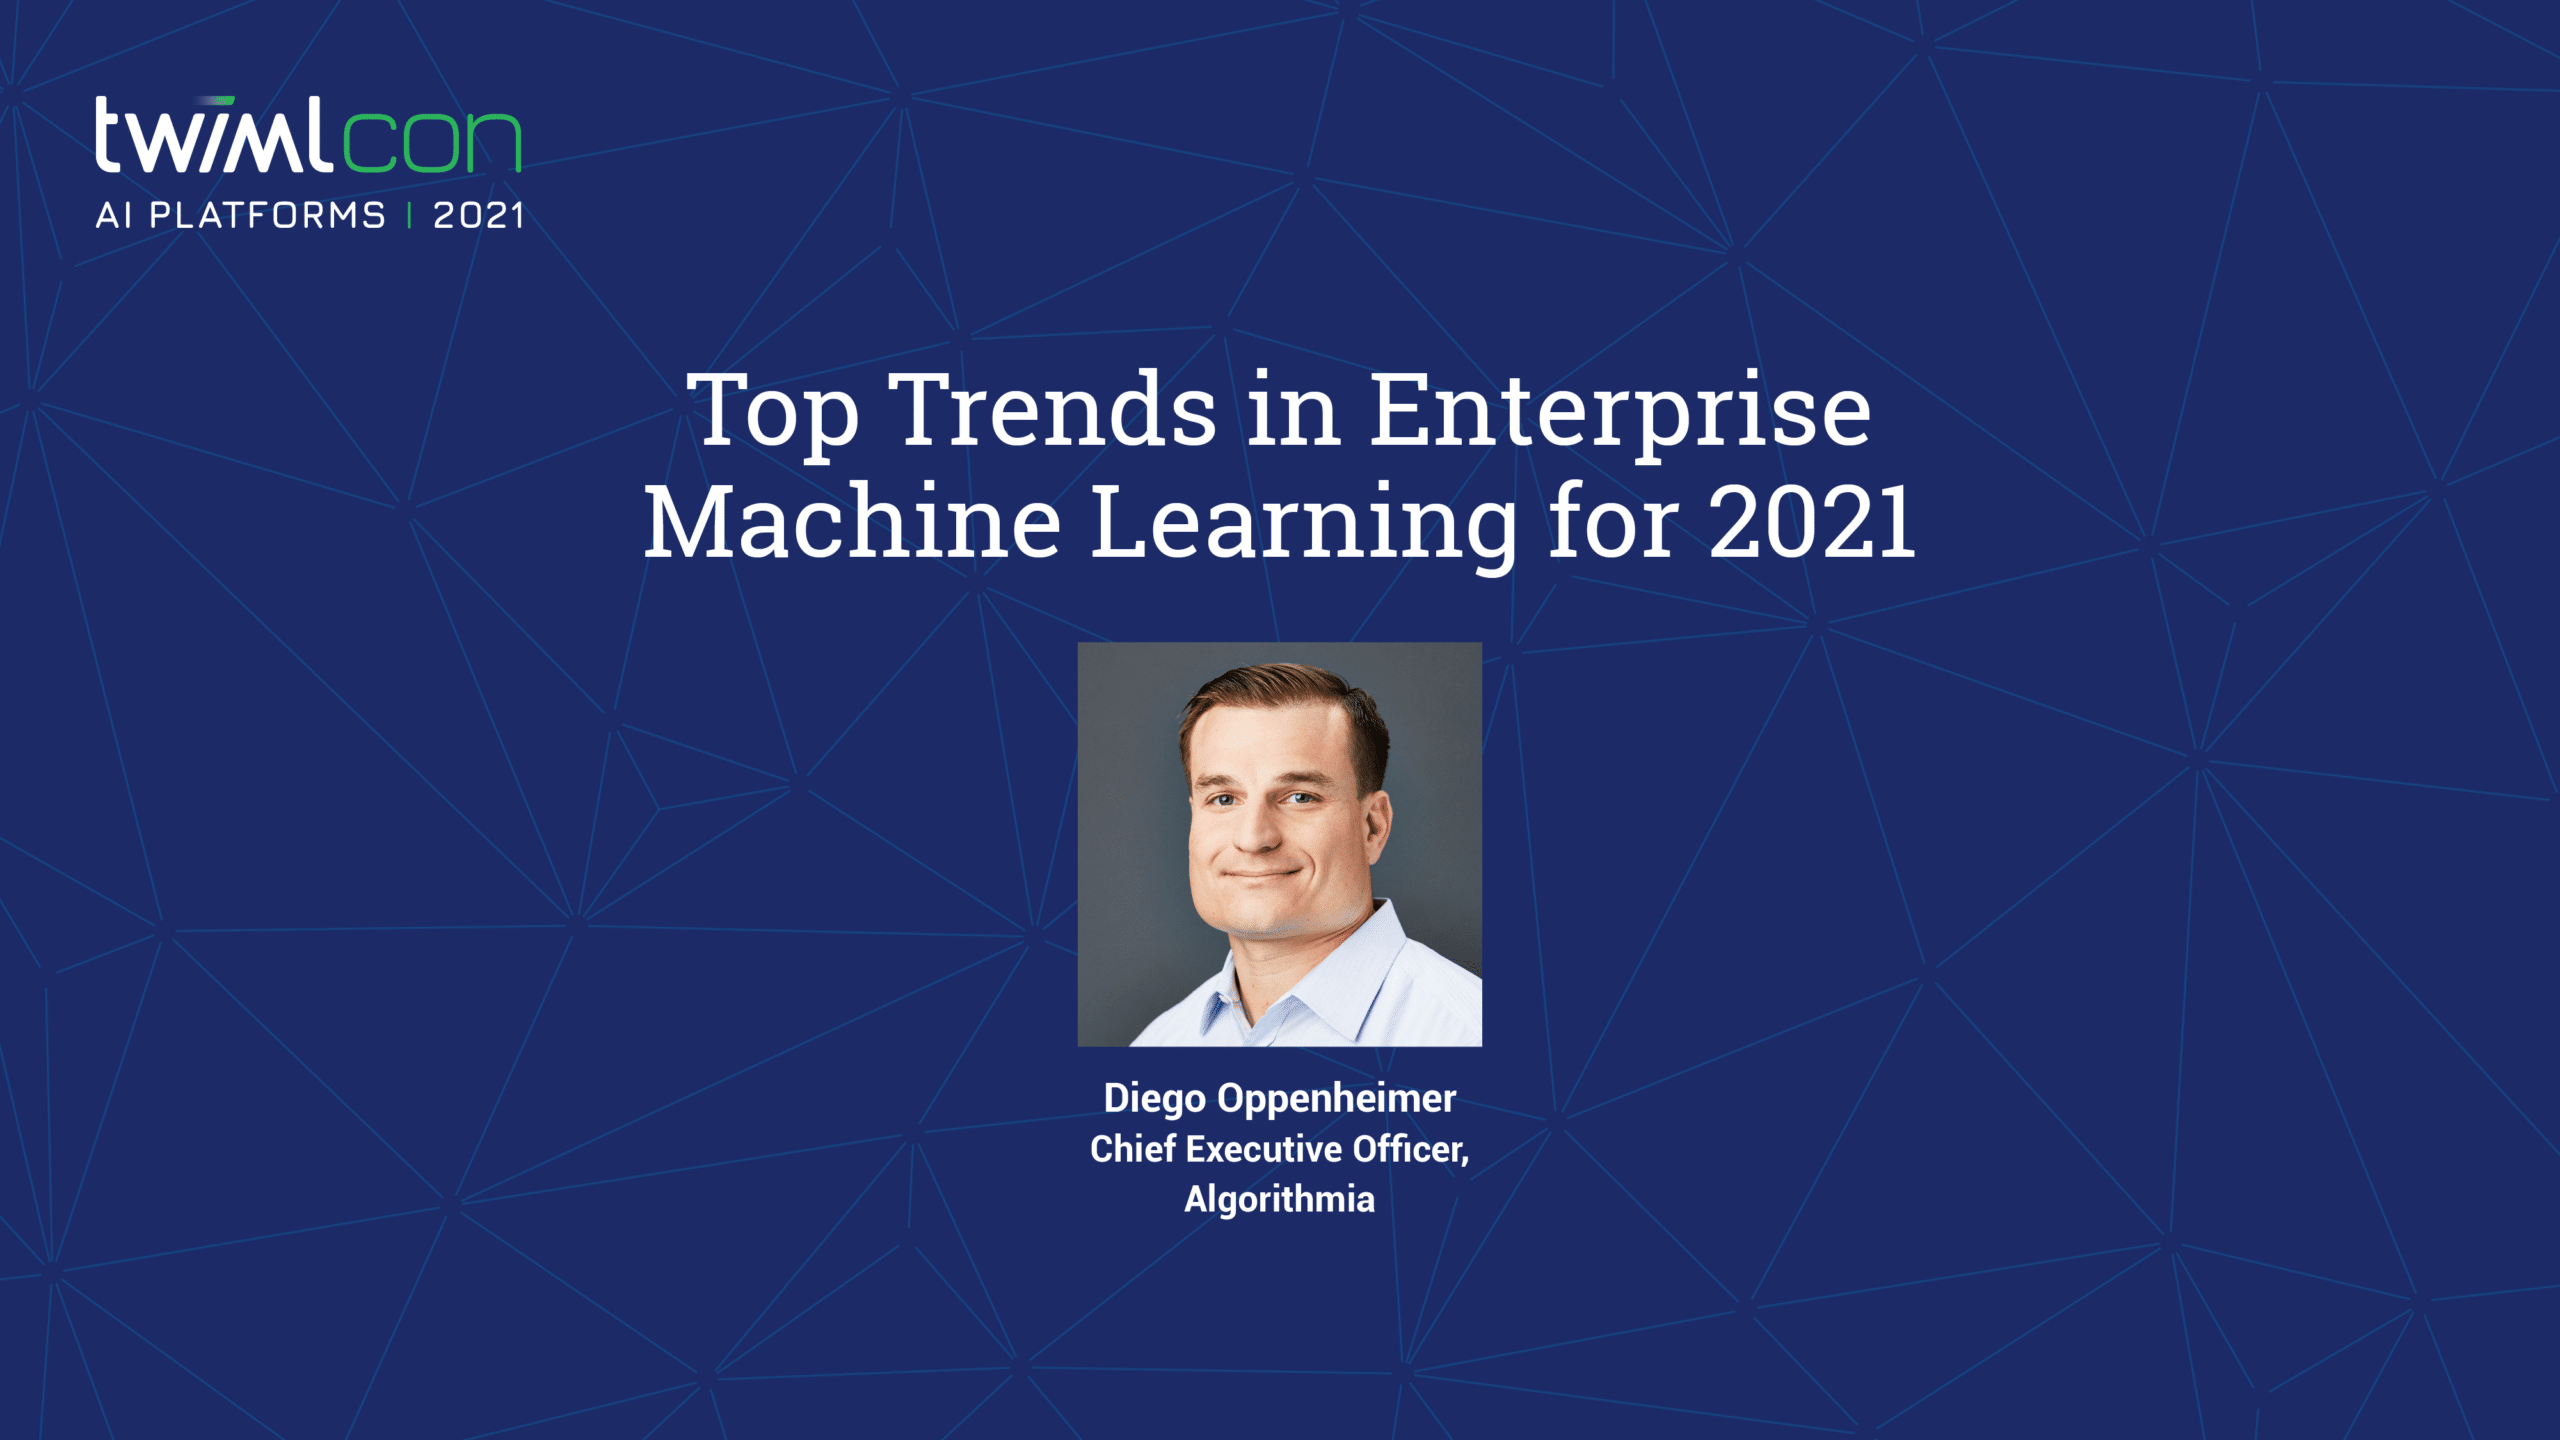 Top Trends in Enterprise Machine Learning for 2021